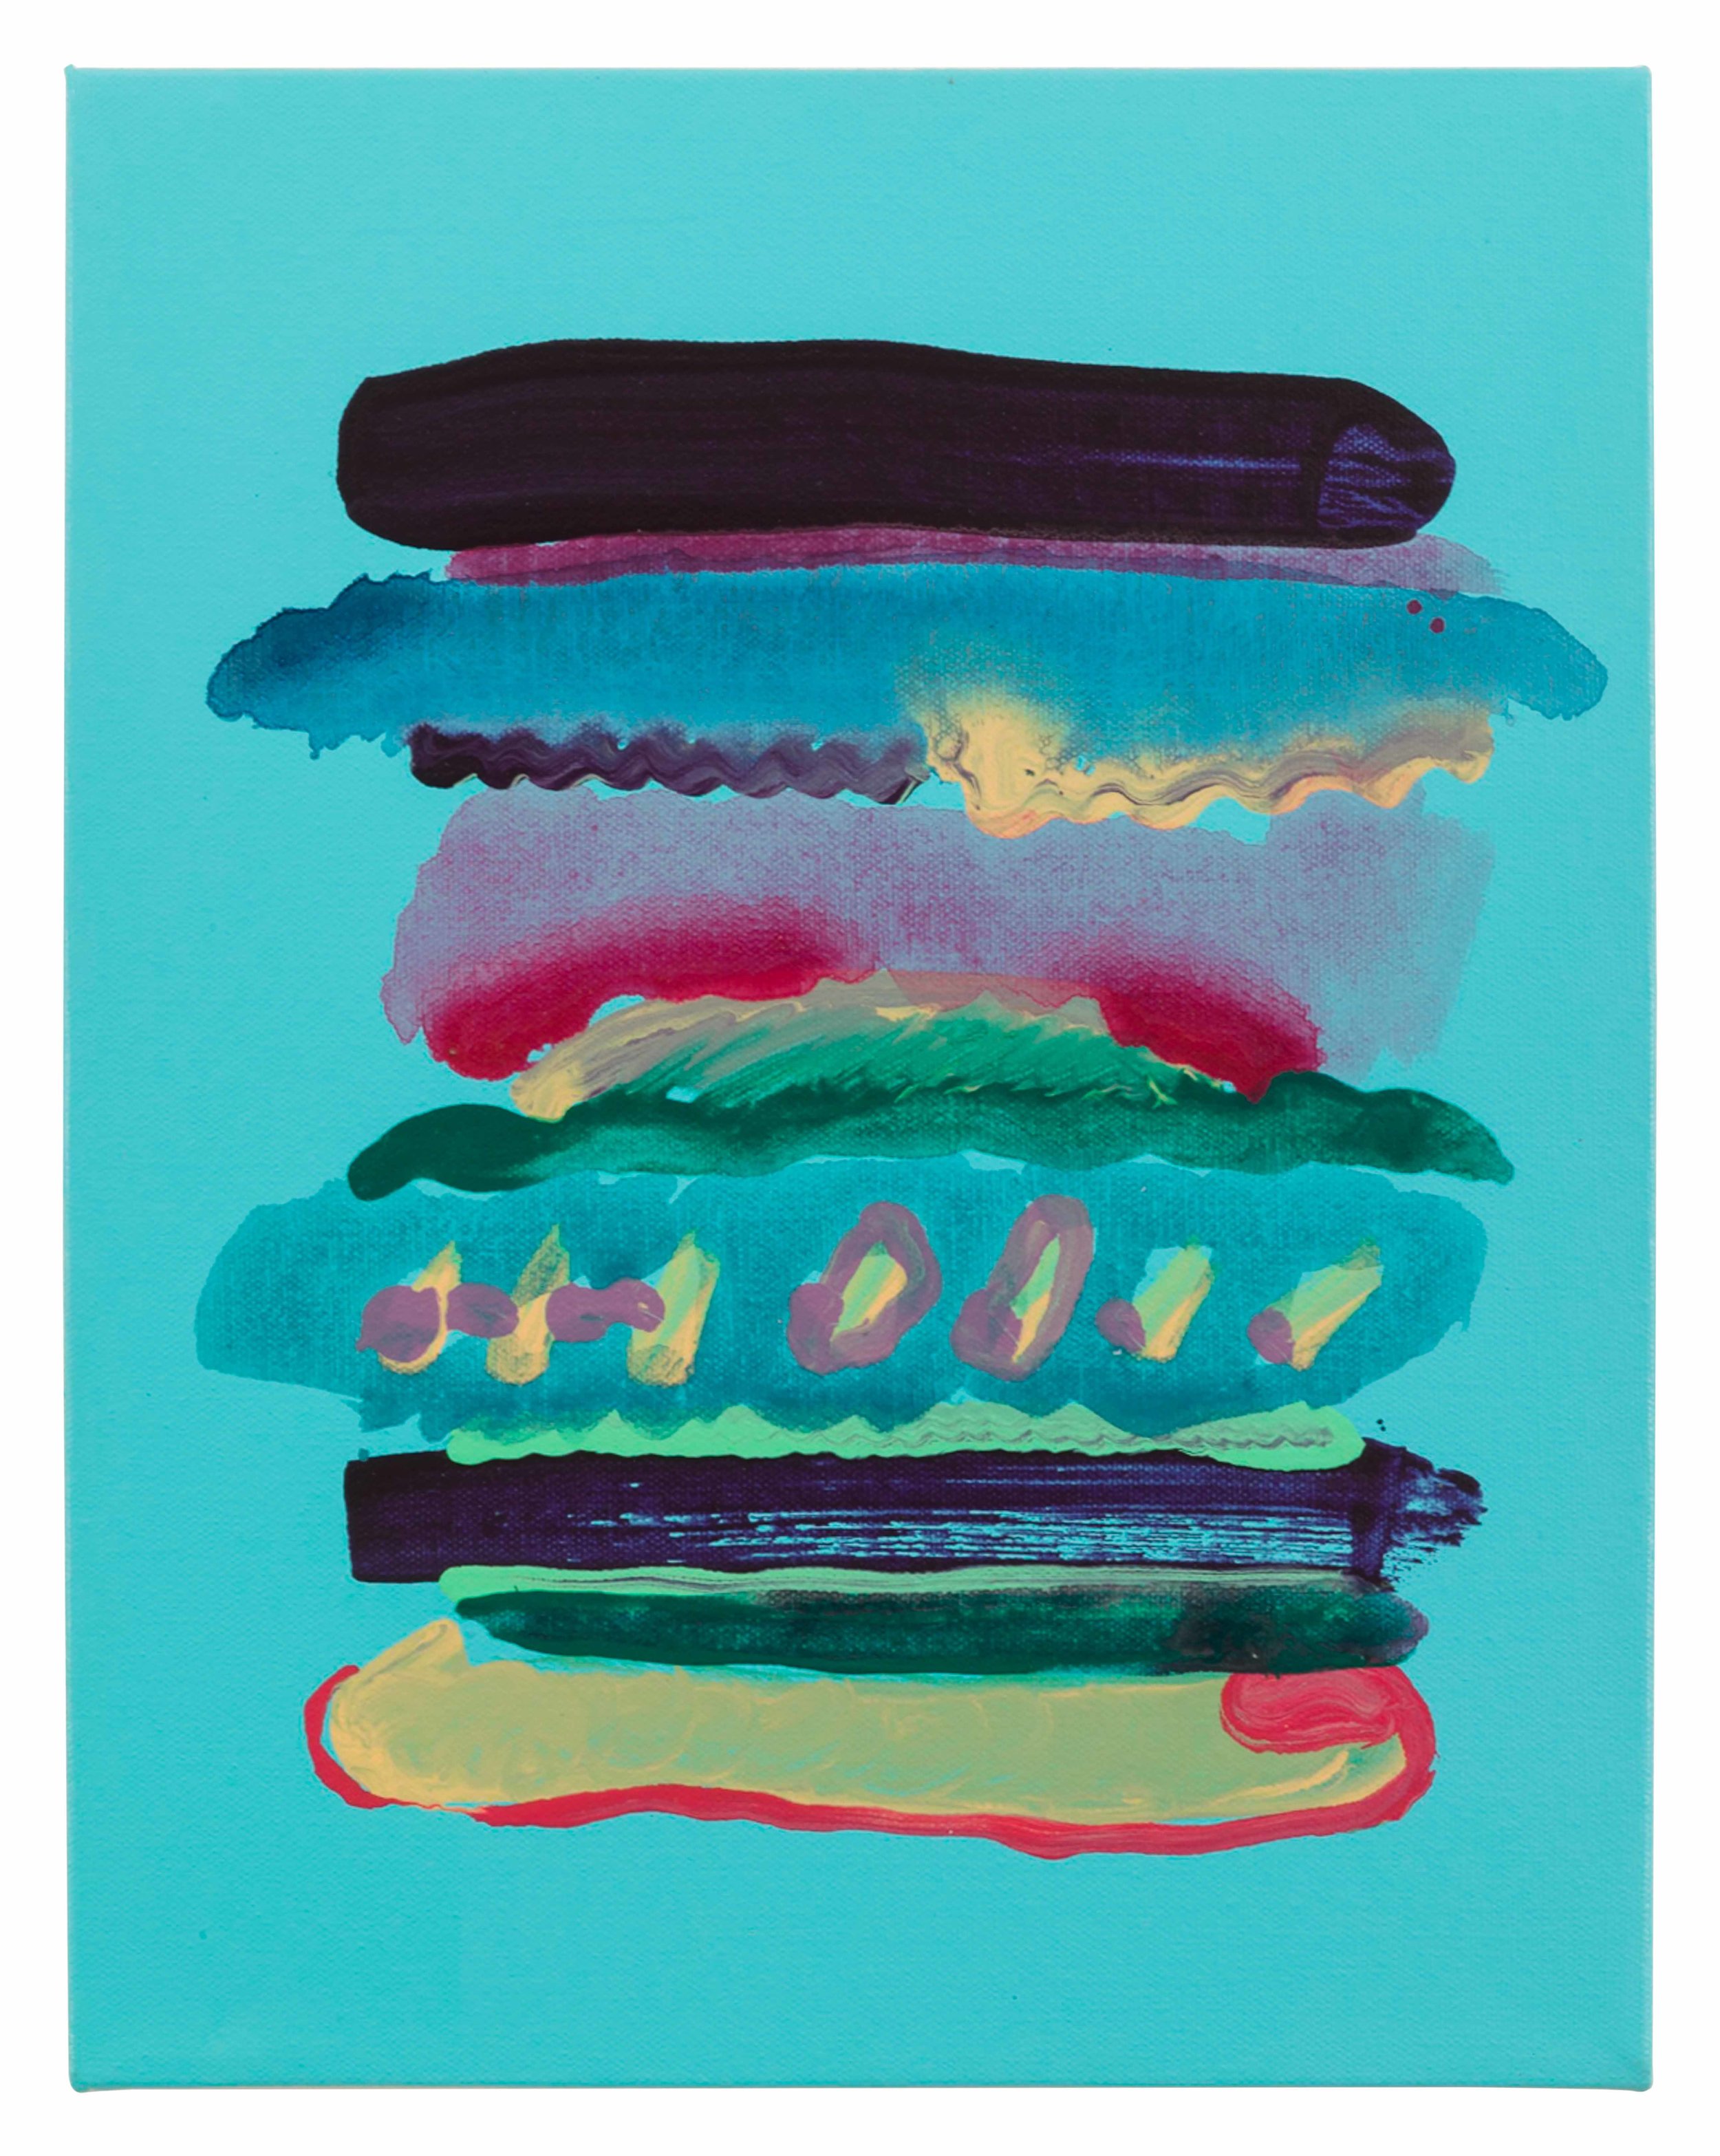  Drew Beattie and Ben Shepard  Small Sandwich on Warm Blue   2015 acrylic on canvas 14 x 11 inches 